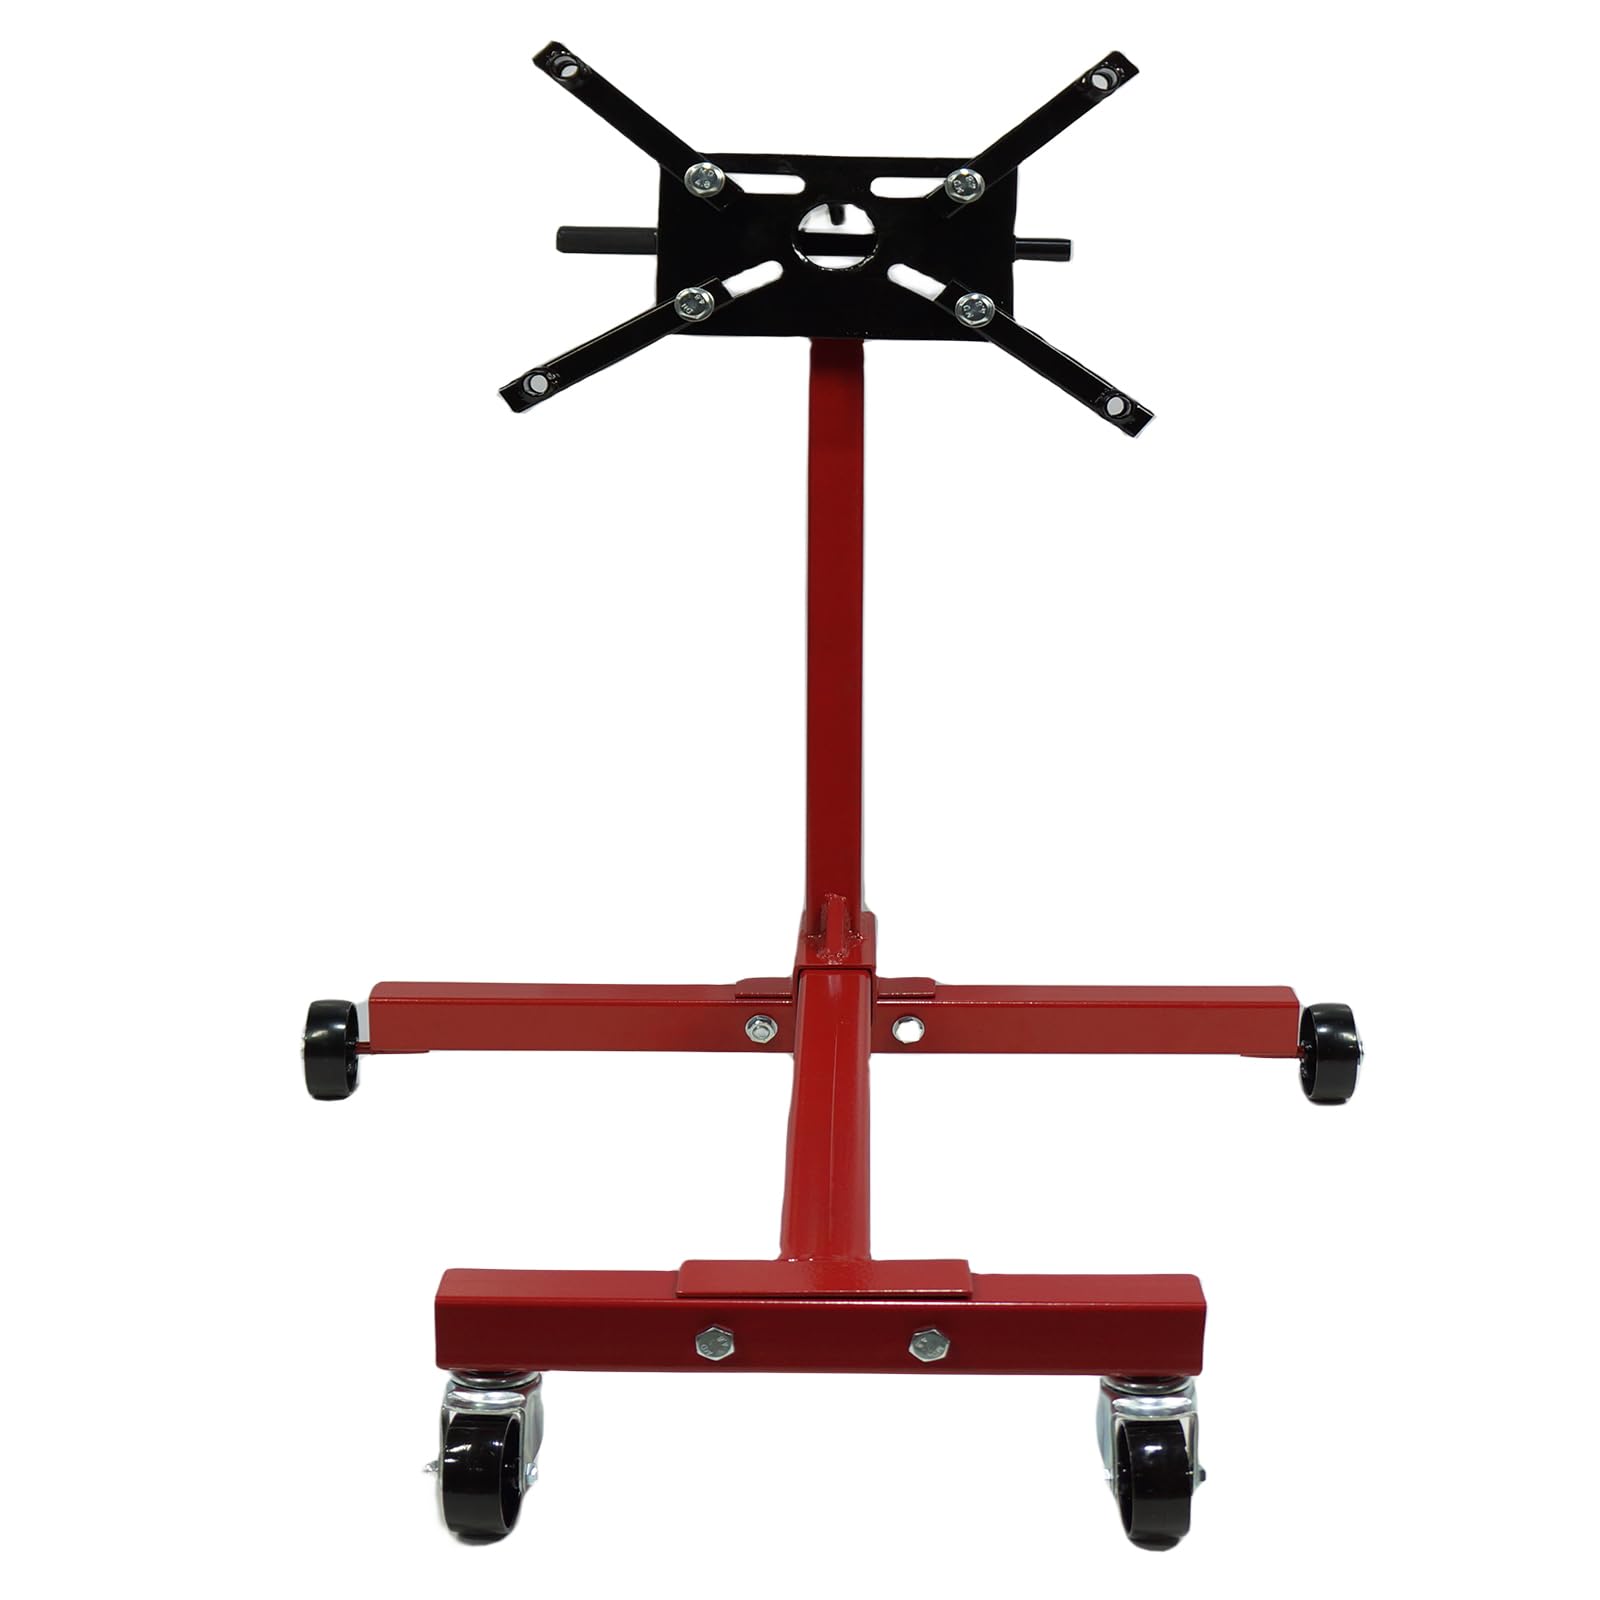 Rotating Engine Stand, 1000LBS Capacity 360 Degree Rotating Head Adjustable Motor Stand with Arms and Caster Wheels, Auto Truck Motor Dolly Mover Jack